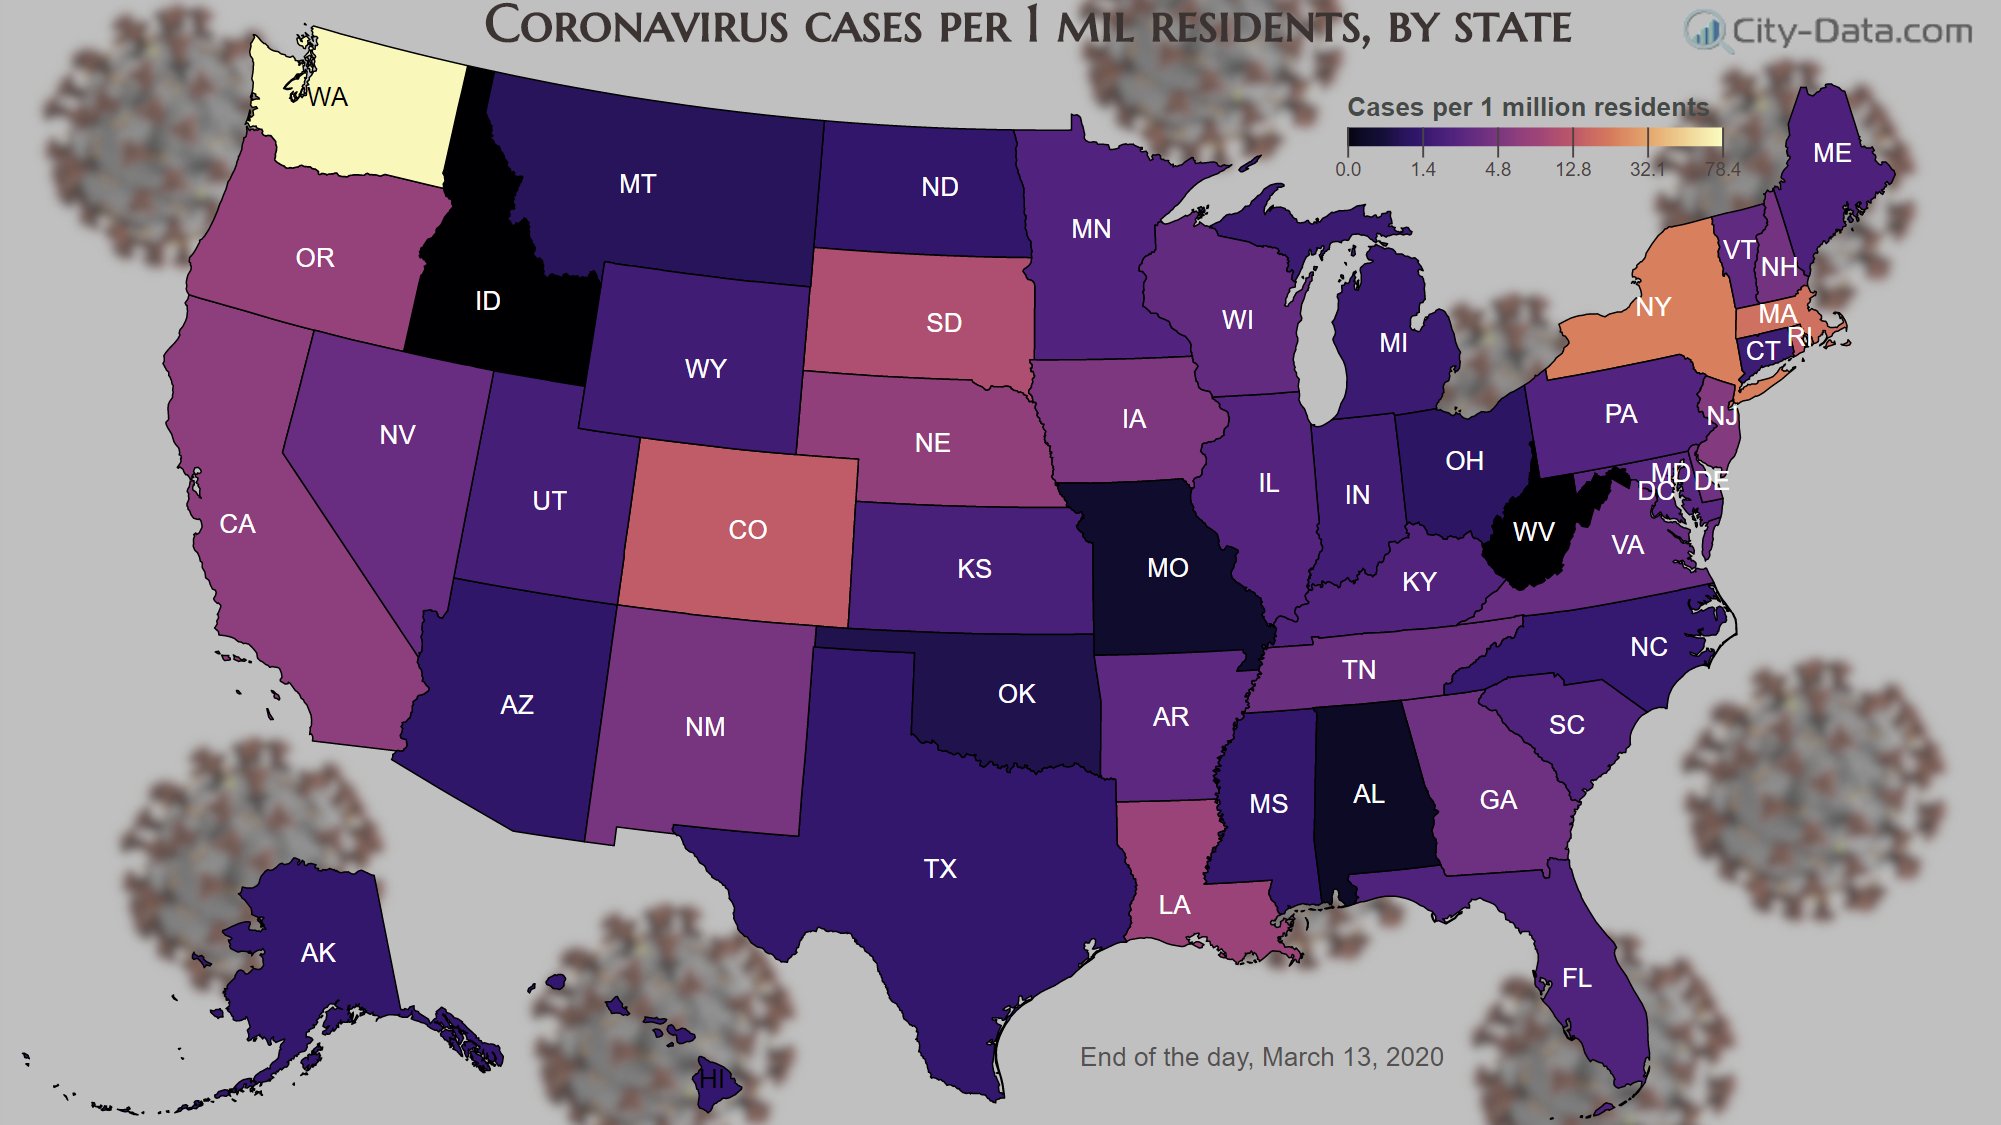 Coronavirus (COVID-19) cases per 1 million residents by state